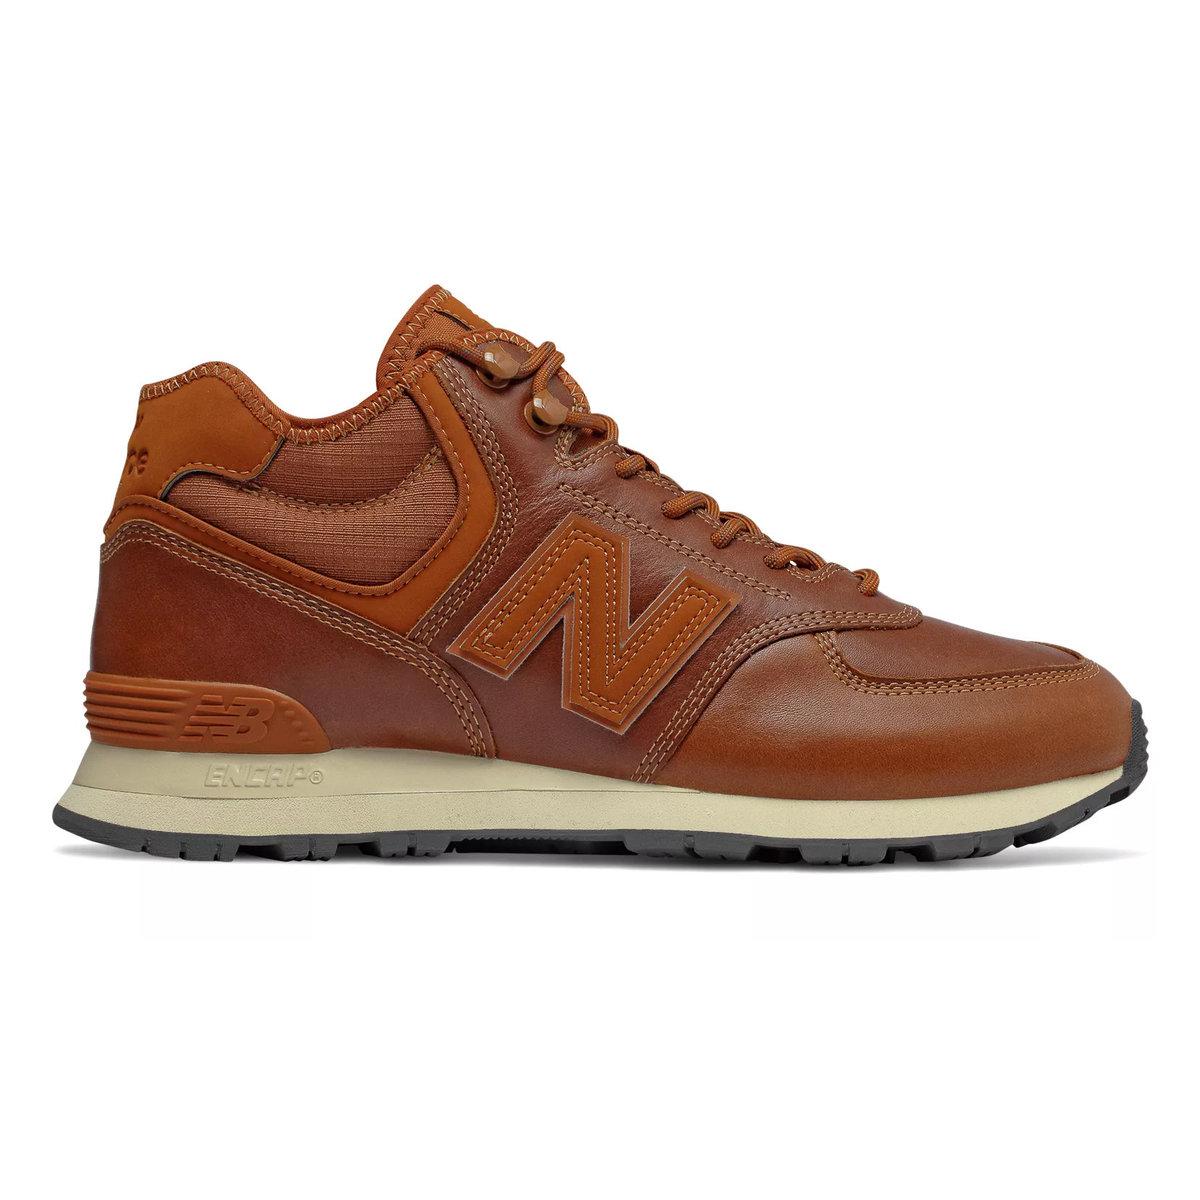 New Balance Leather Iconic 574 Sneaker in Brown for Men - Lyst